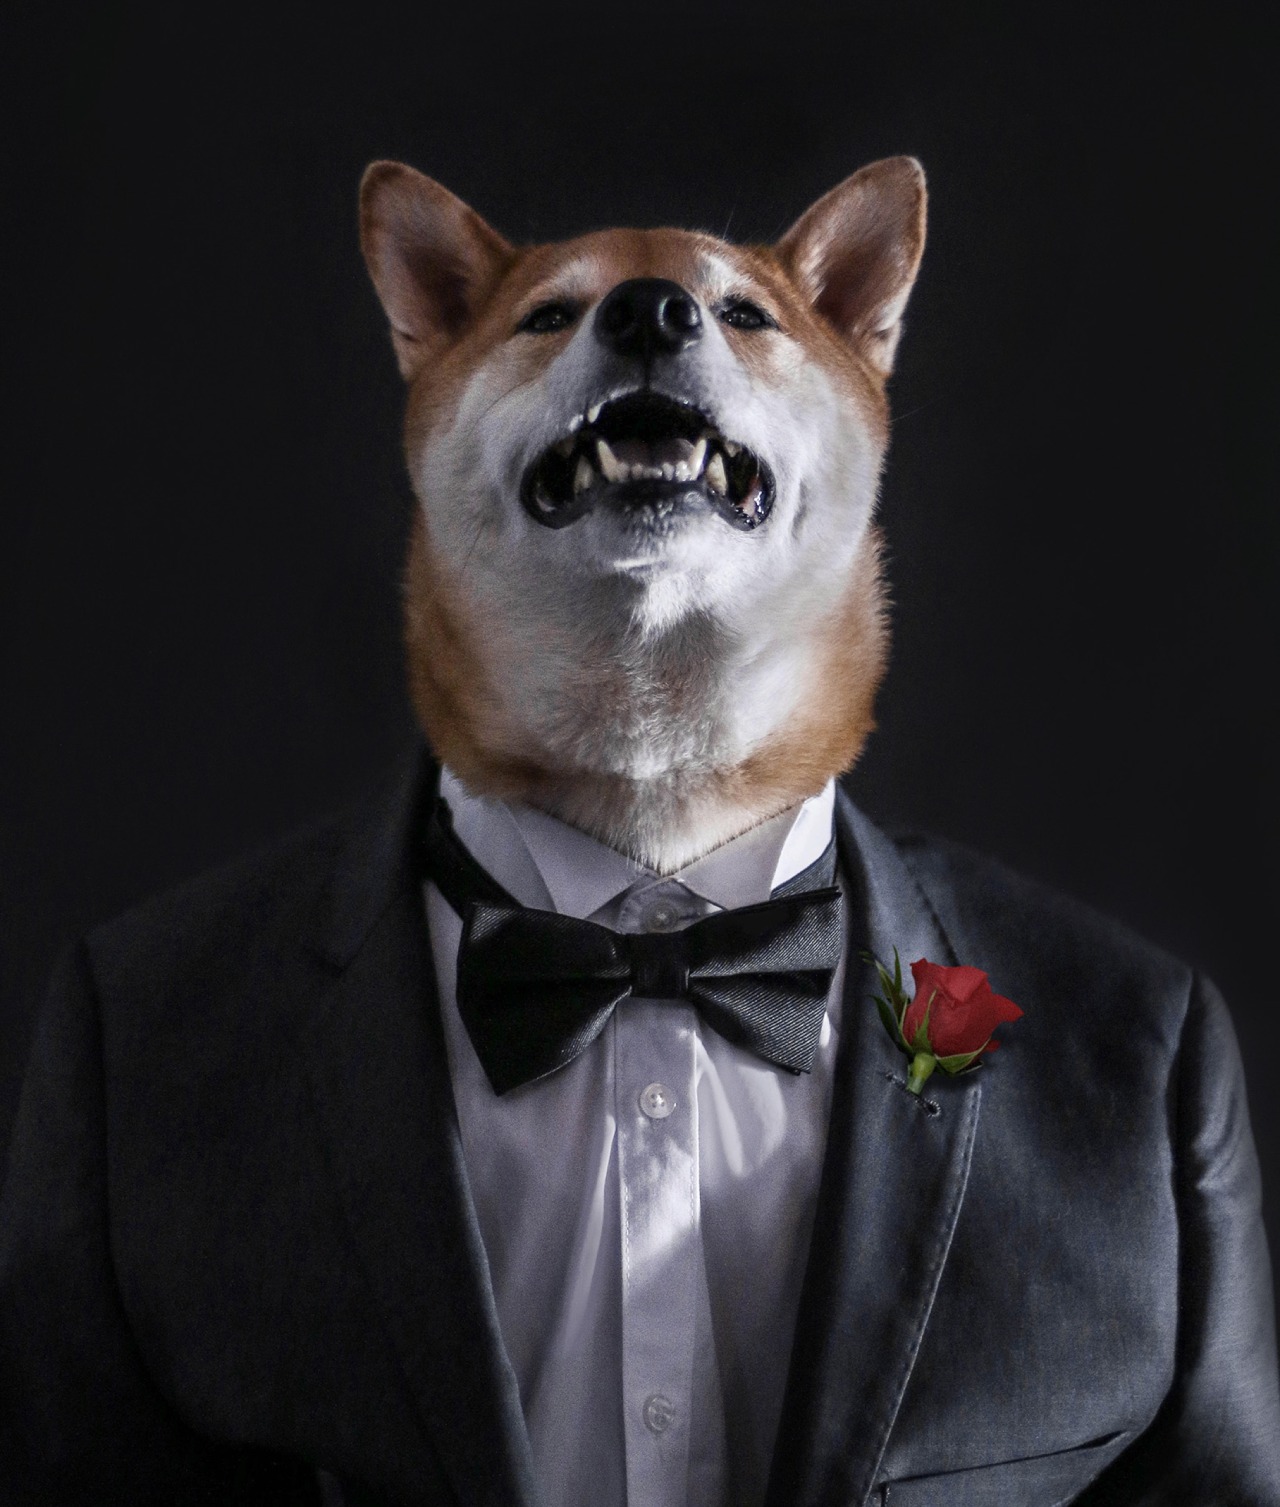 mensweardog:
“ The Dogfather 🌹
”
I’m a man.
No a wolf.
I have feelings.
I roam the night.
I hunger for her.
I walk on all four.
I need her love.
I yearn for freedom.
I am man.
I will win her love.
THE DEAD...